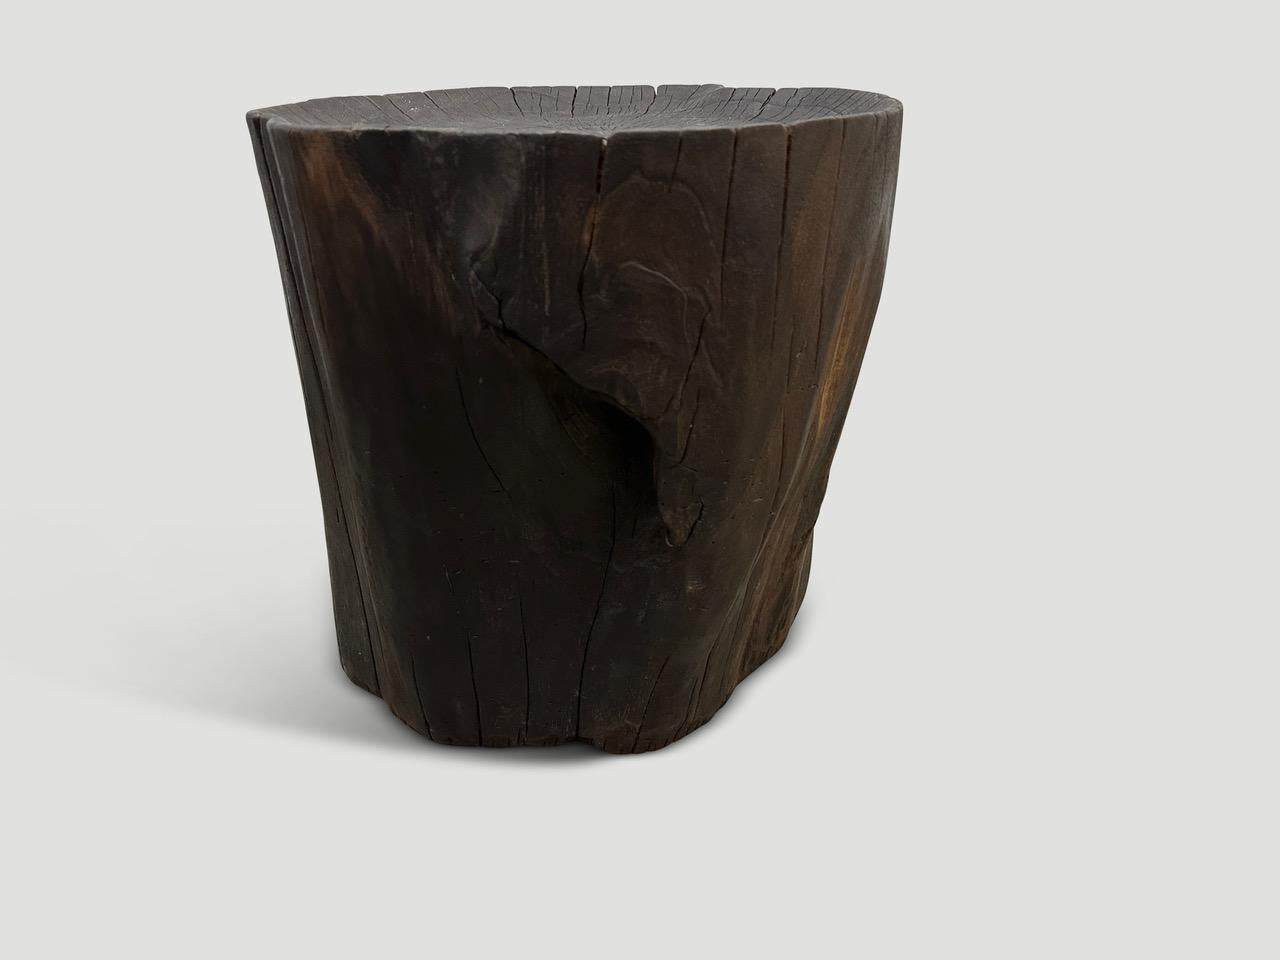 Natural organic formed reclaimed teak root side table. We hand carved the top section into a tray style and lightly charred the aged teak revealing the beautiful wood grain. Both usable and sculptural. We have a collection. All unique. Please